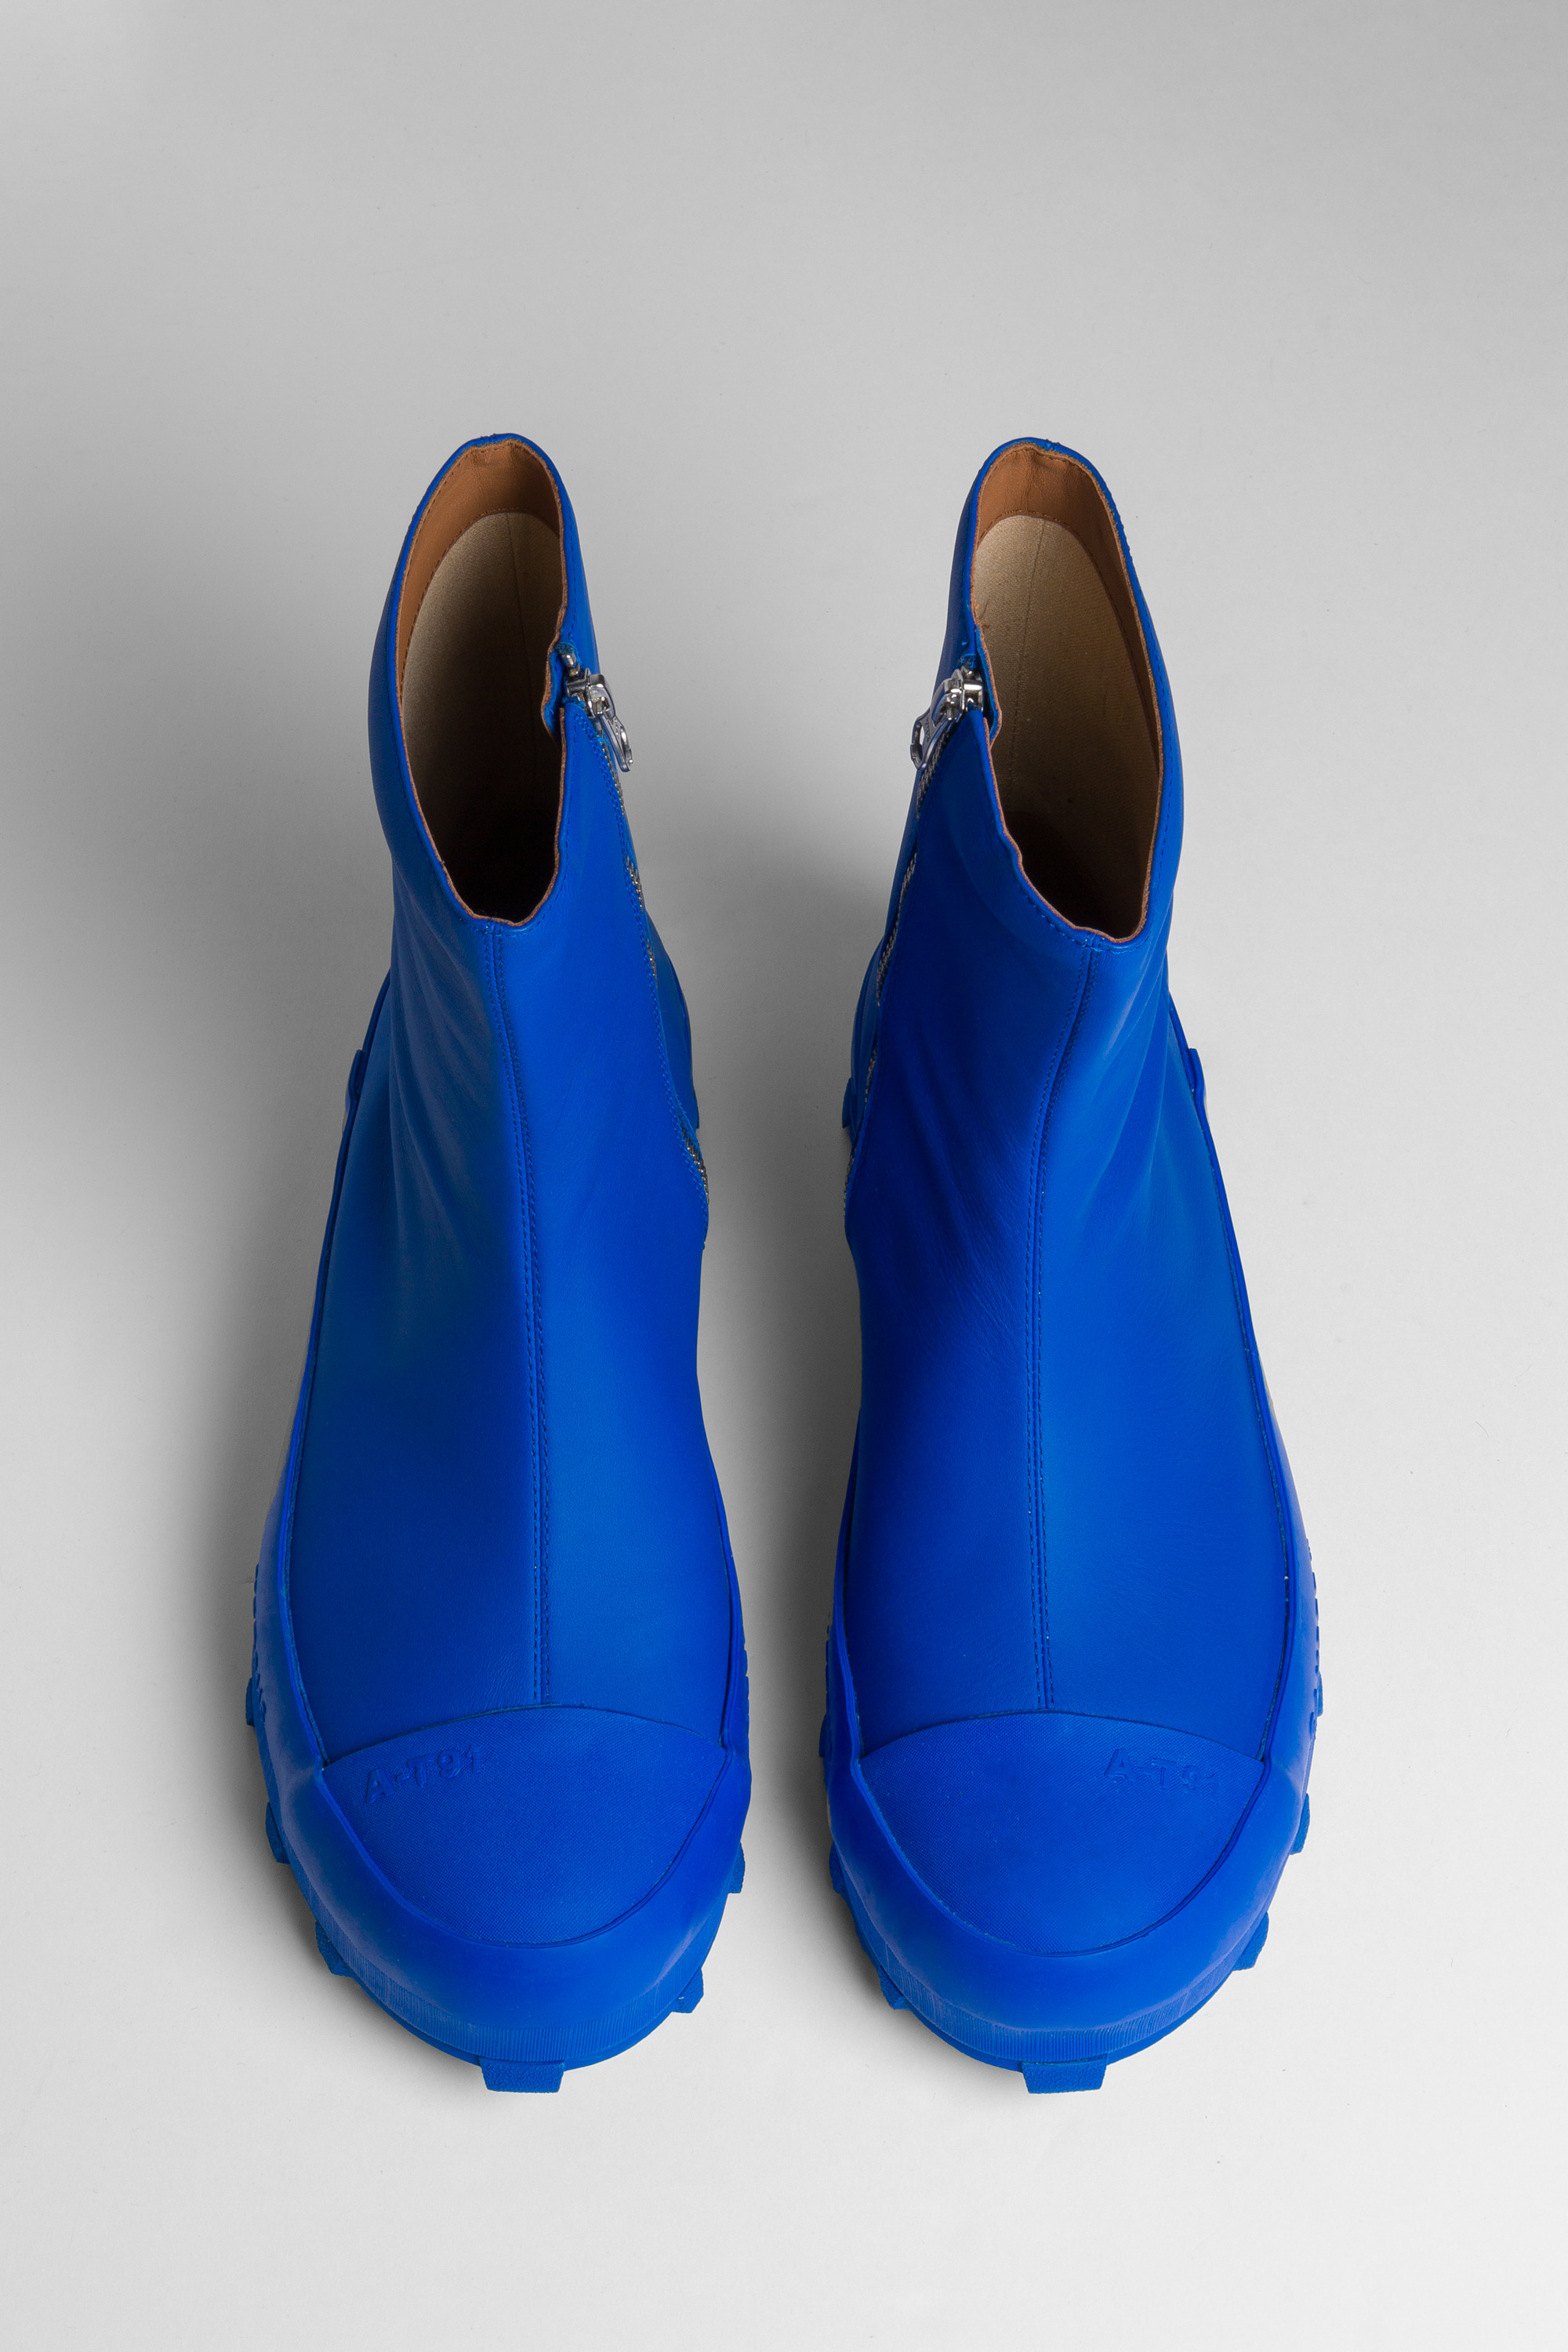 TKR Blue Boots for Women - Fall/Winter collection - Camper USA